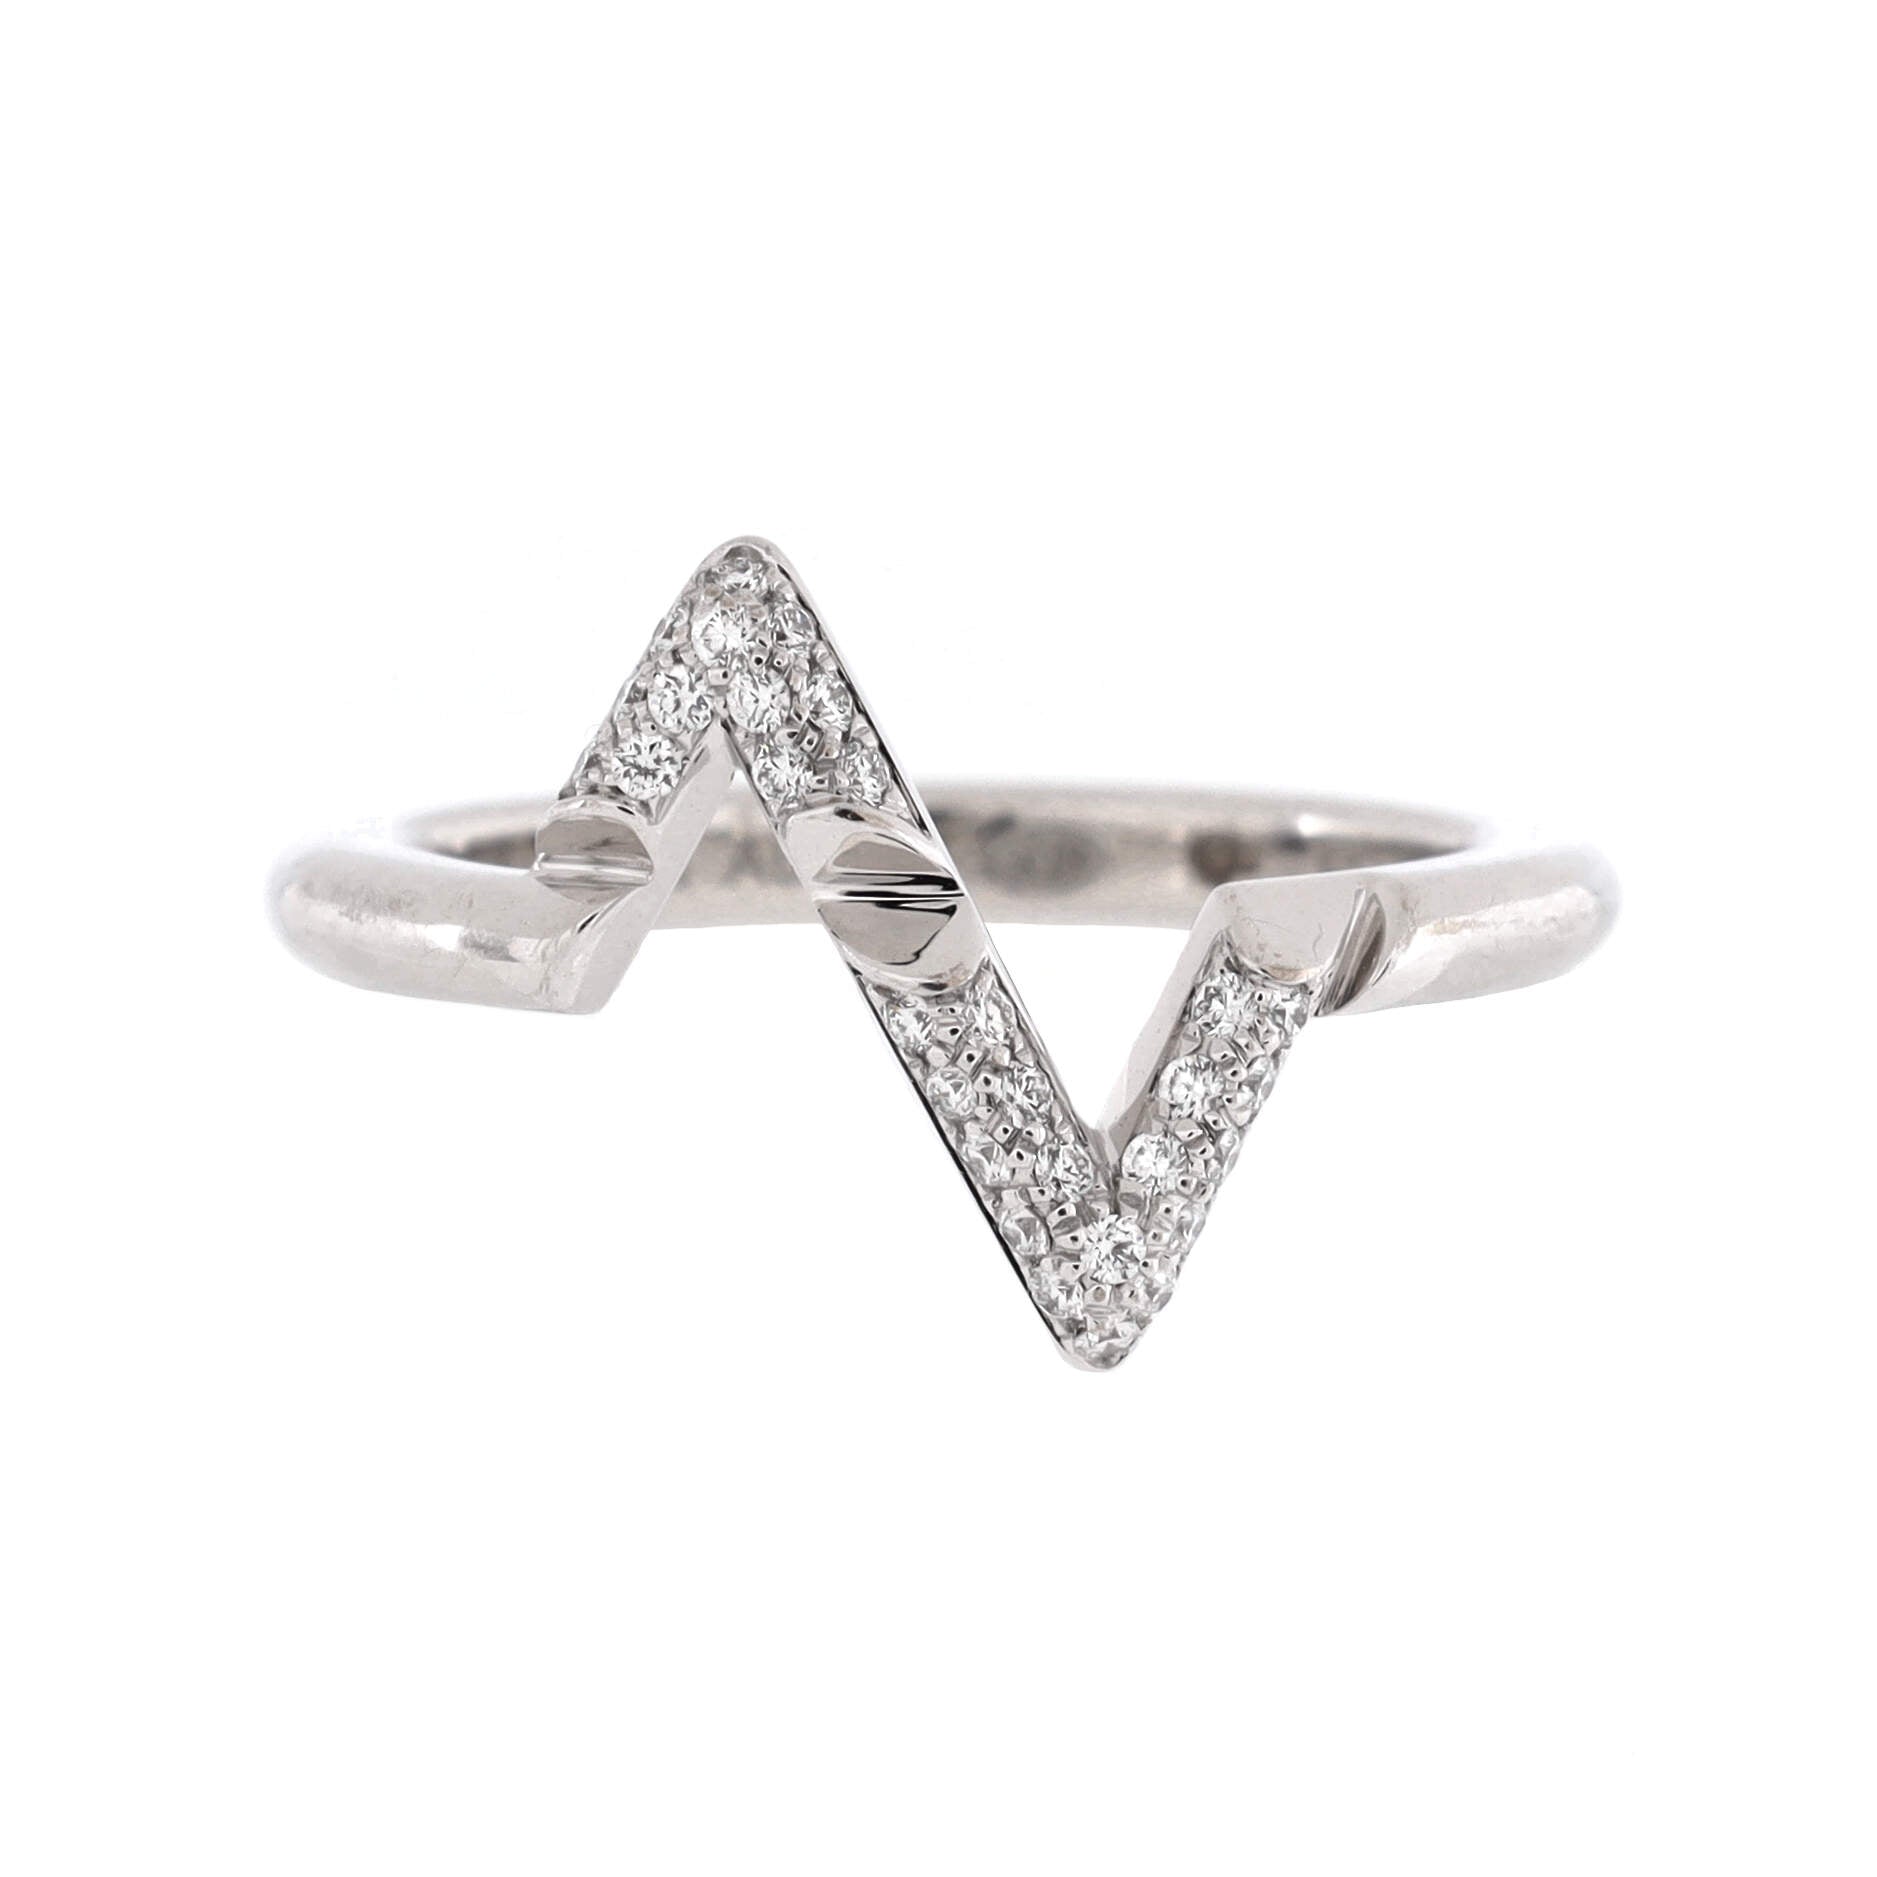 Louis Vuitton LV Volt Upside Down Ring, White Gold and Diamonds Grey. Size 47